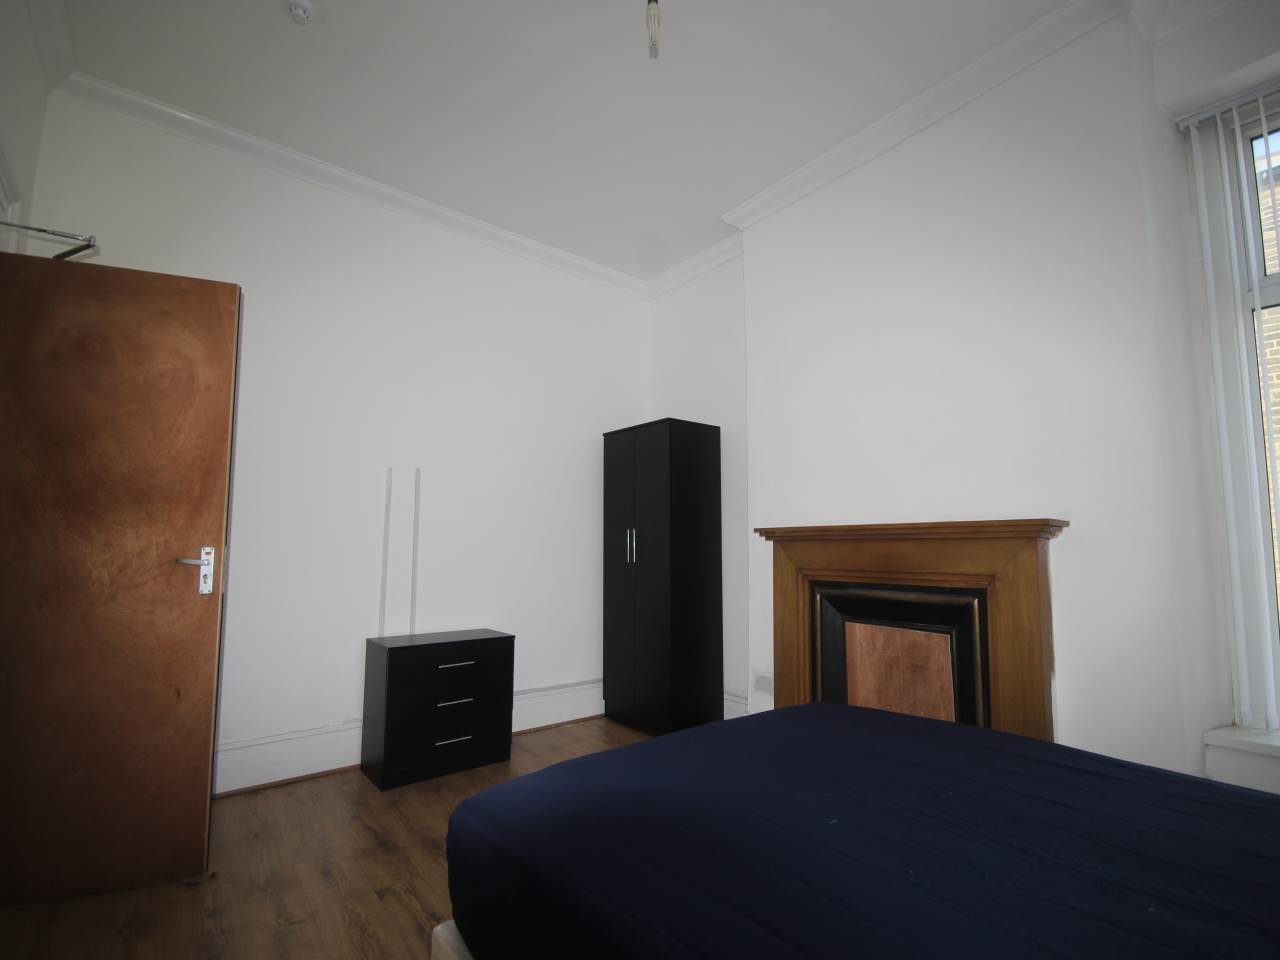 1 bed house / flat share to rent in Little Horton Lane  - Property Image 2